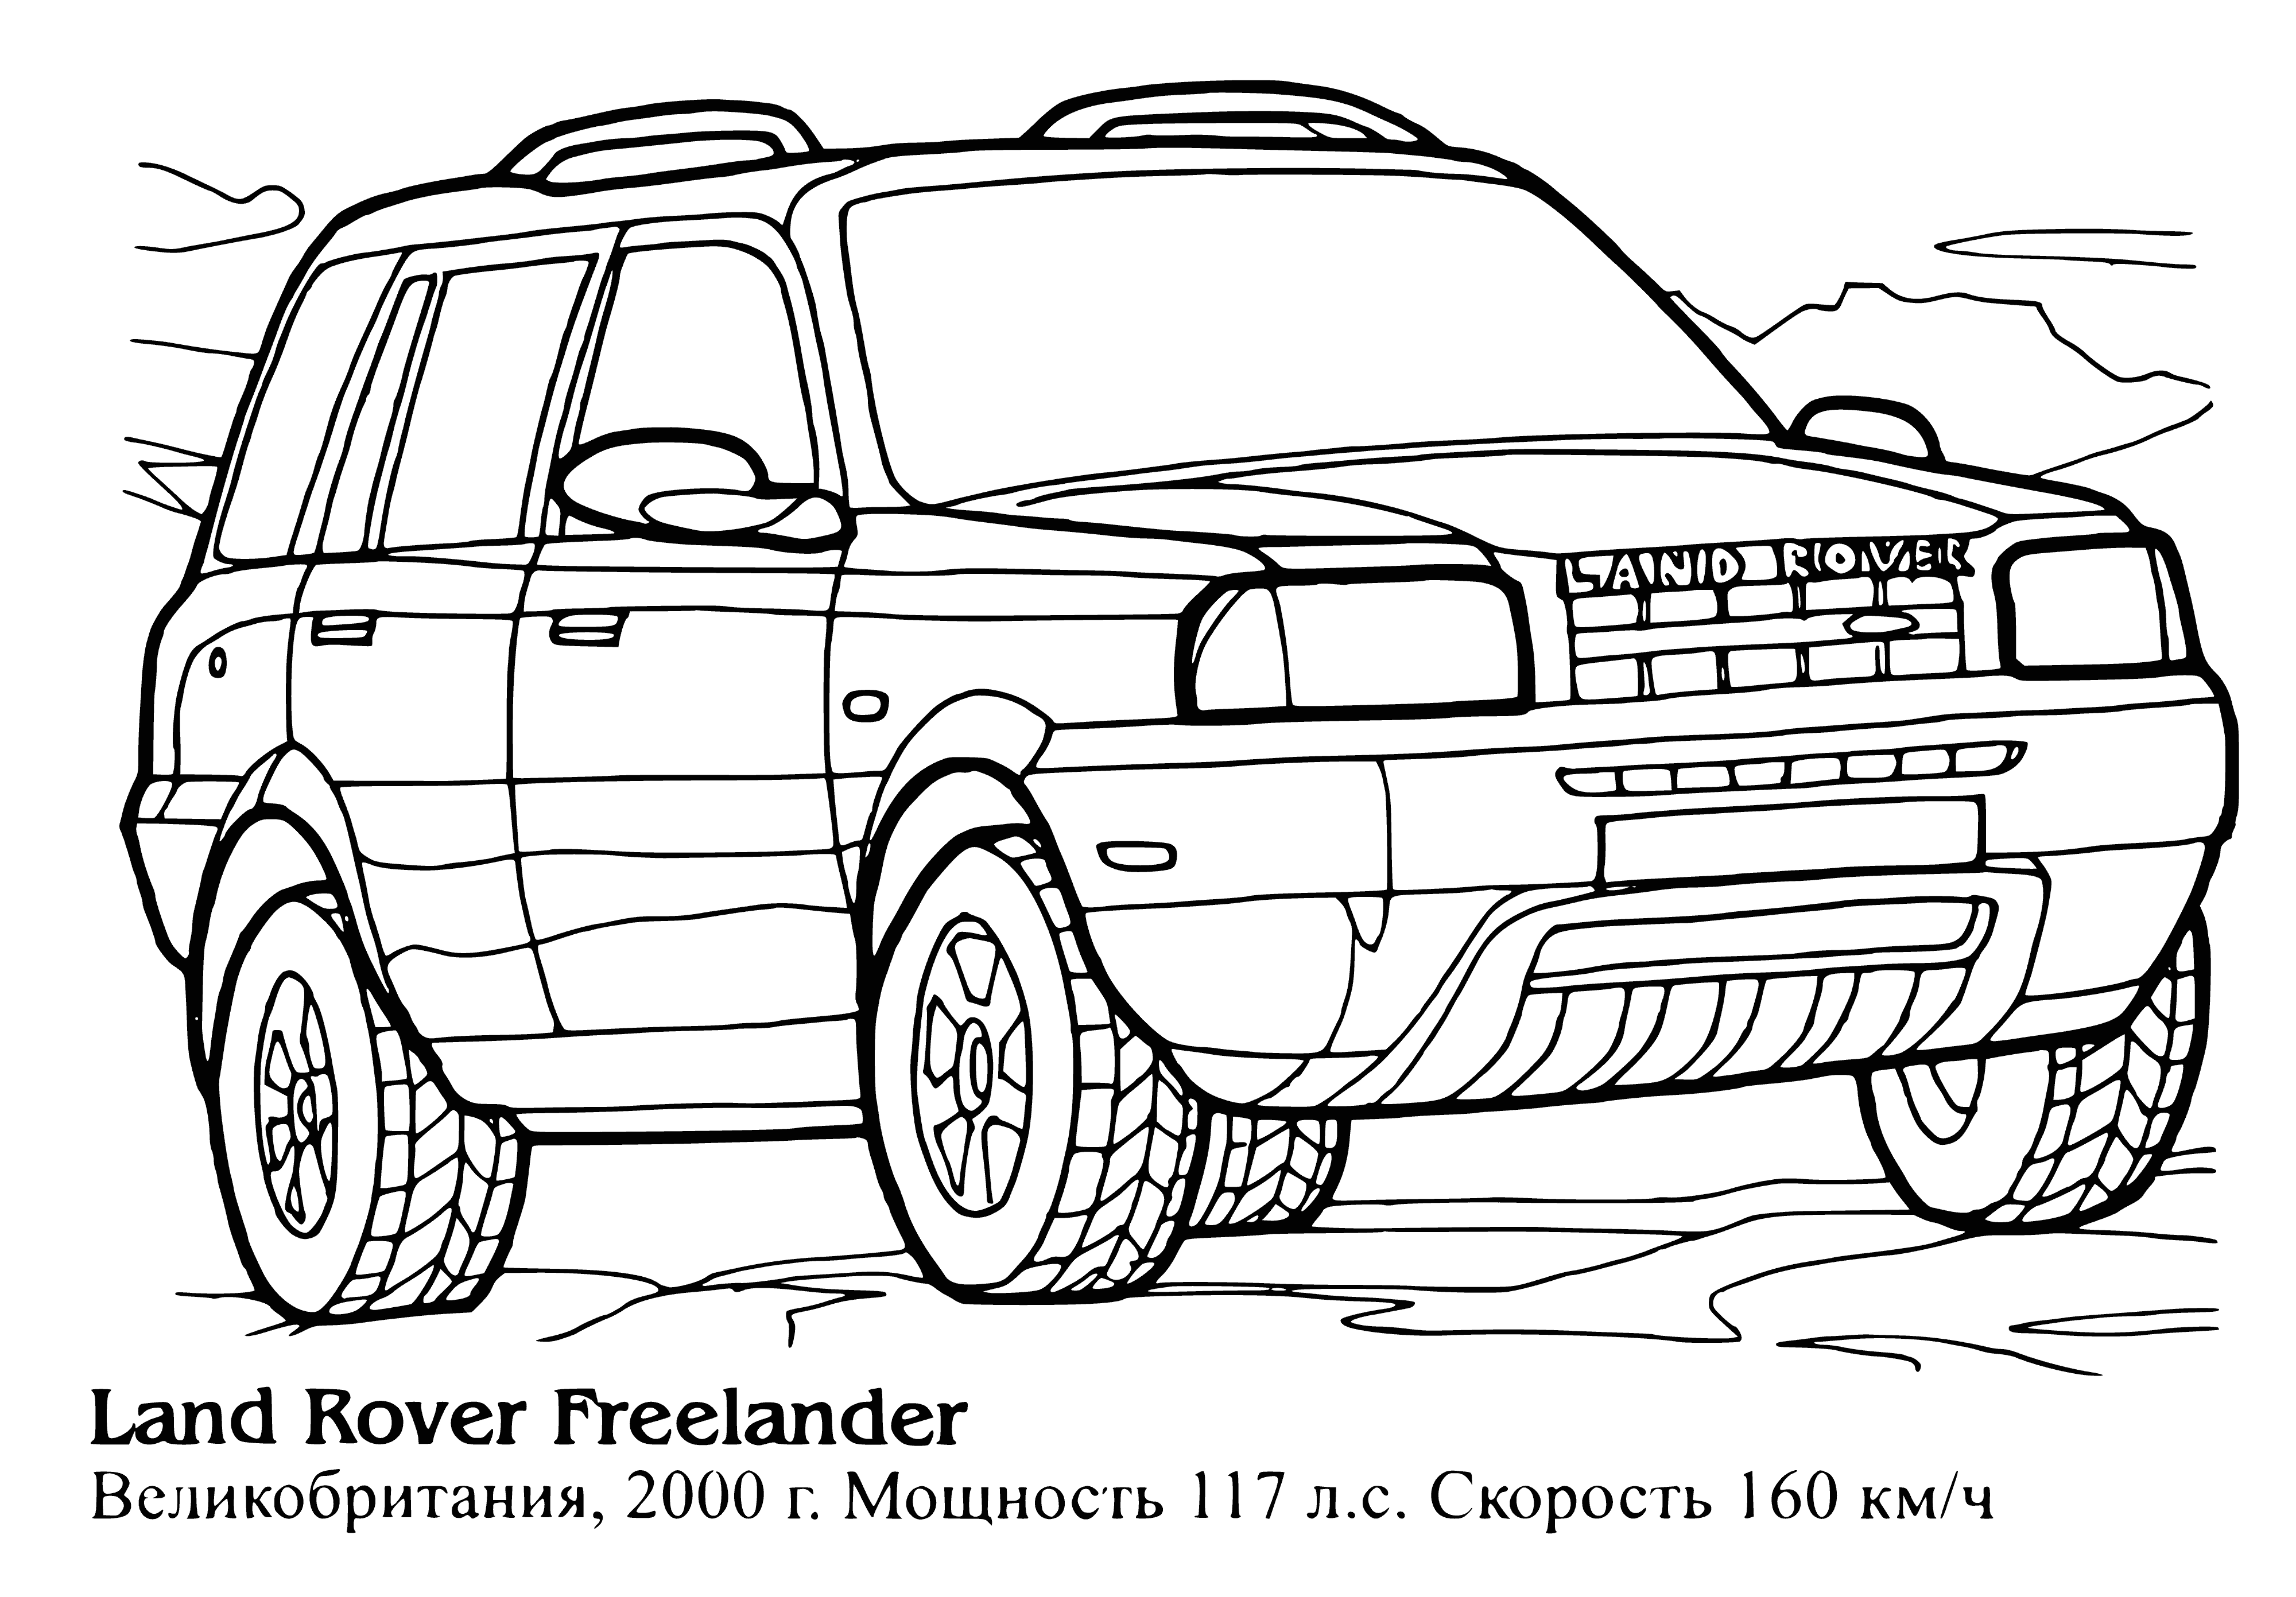 coloring page: A black car is parked on an asphalt road: shines, 4 round headlights, silver grill, 4 doors, back higher than front, large windows, 4 black tires.